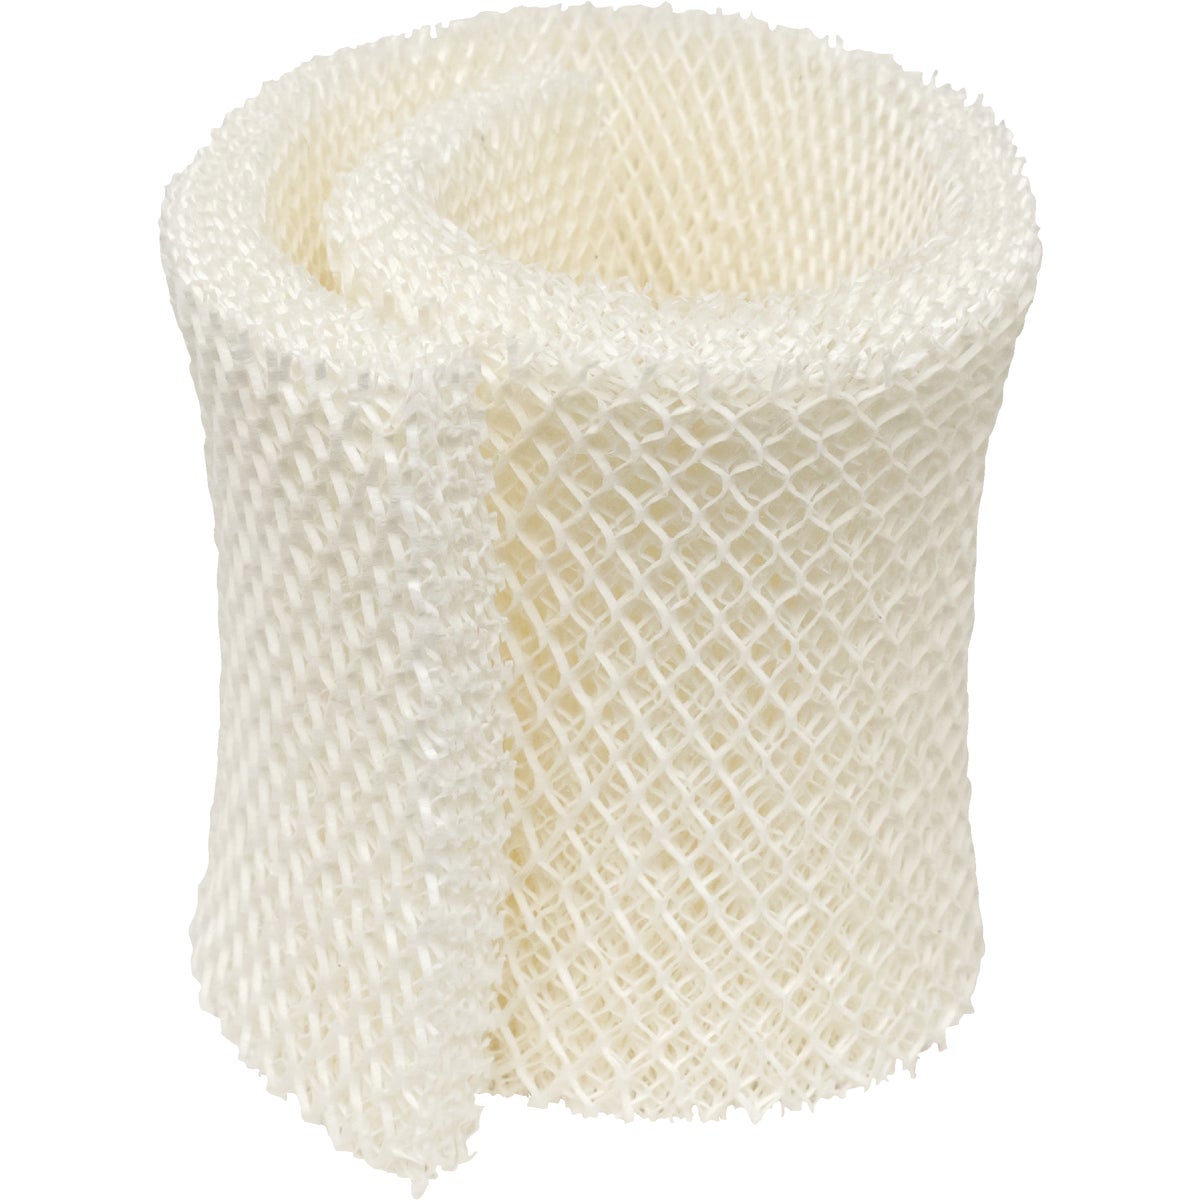 AirCare MAF1 Humidifier Wick Filter